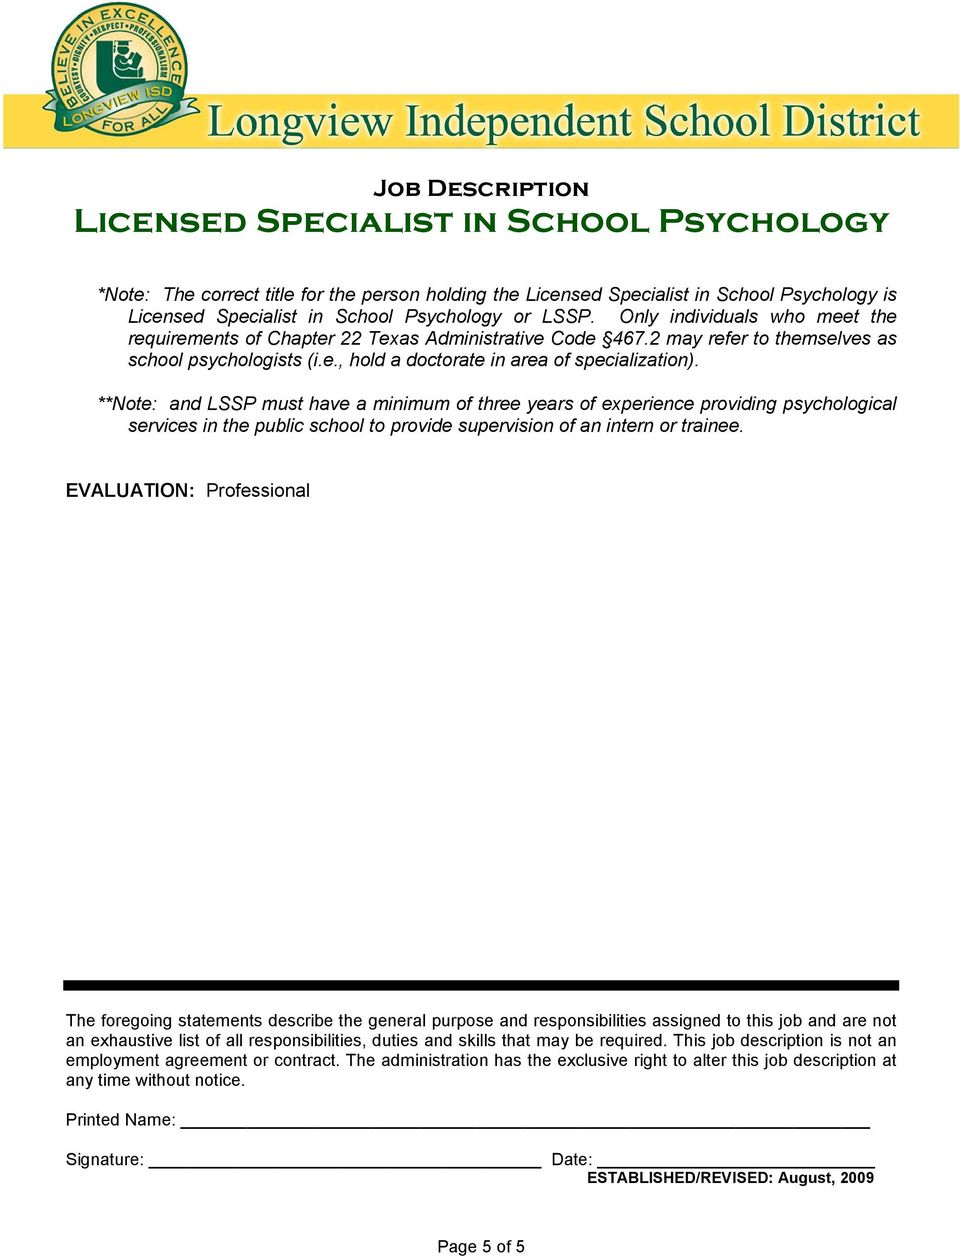 **Note: and LSSP must have a minimum of three years of experience providing psychological services in the public school to provide supervision of an intern or trainee.